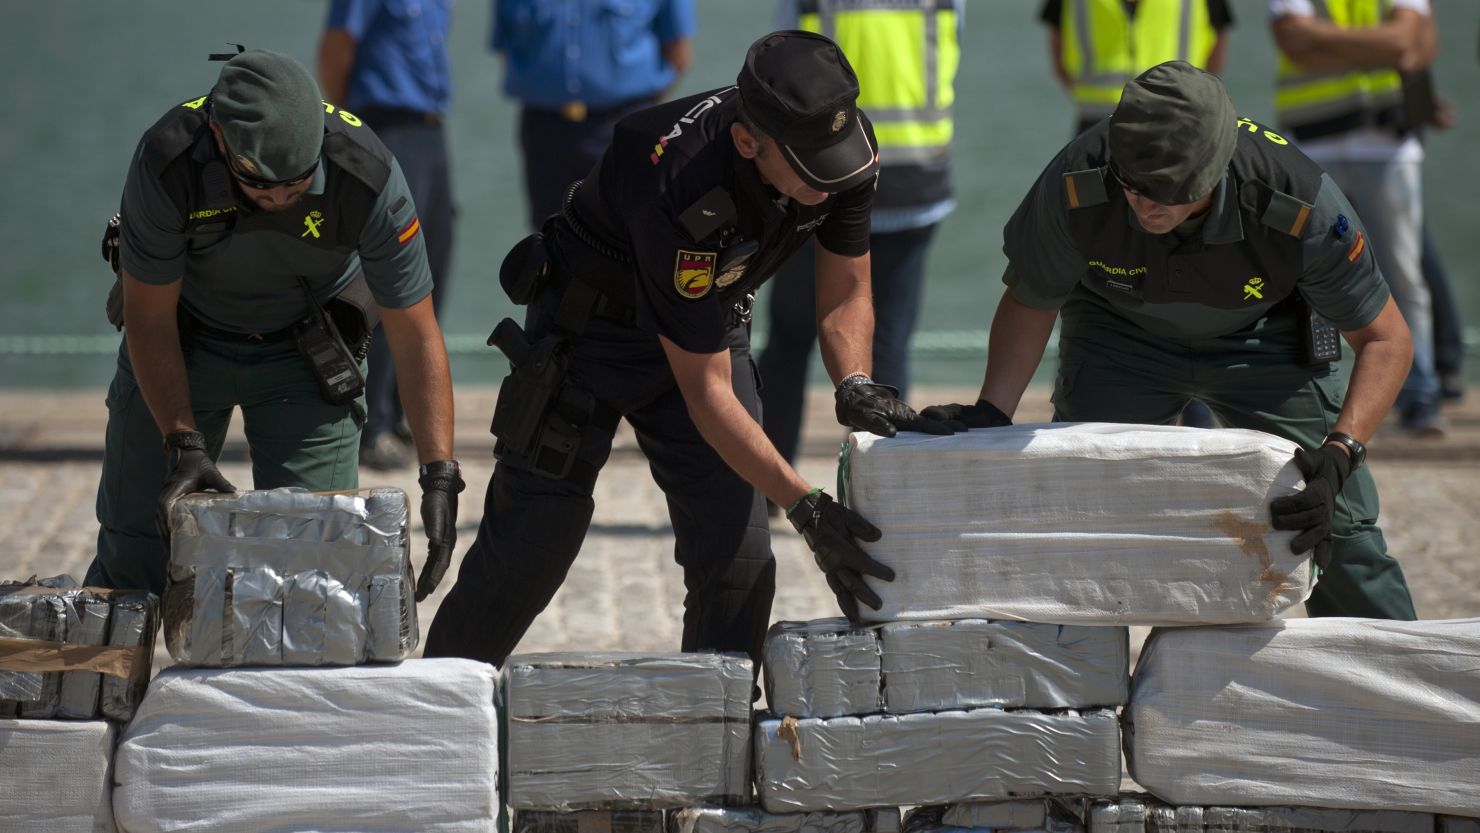 Spanish authorities netted nearly a ton of cocaine, slightly heavier than another large bust in September 2013 (pictured above).